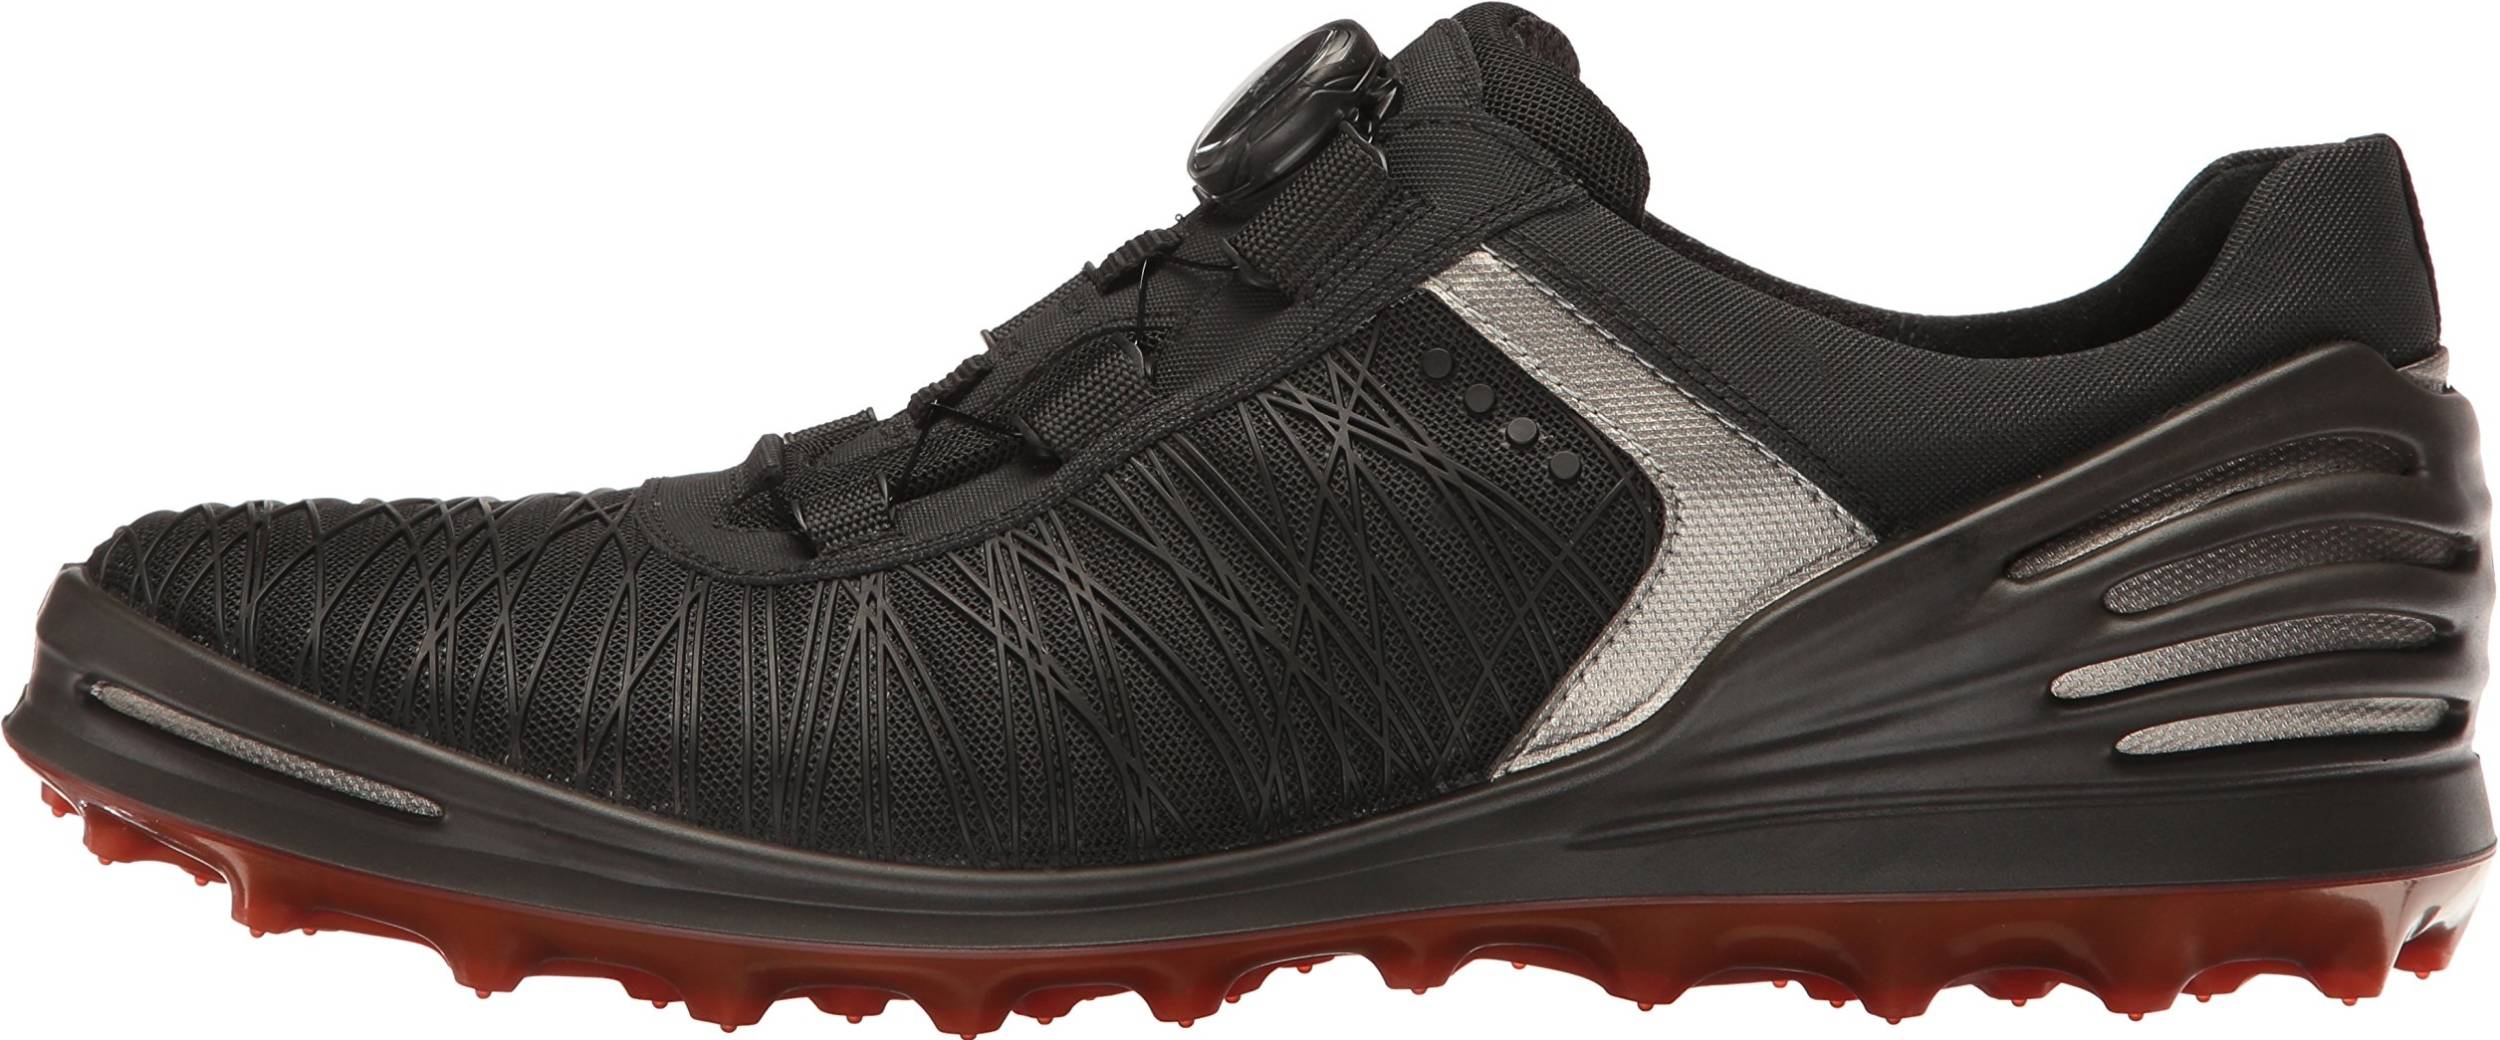 ecco golf shoes review 219